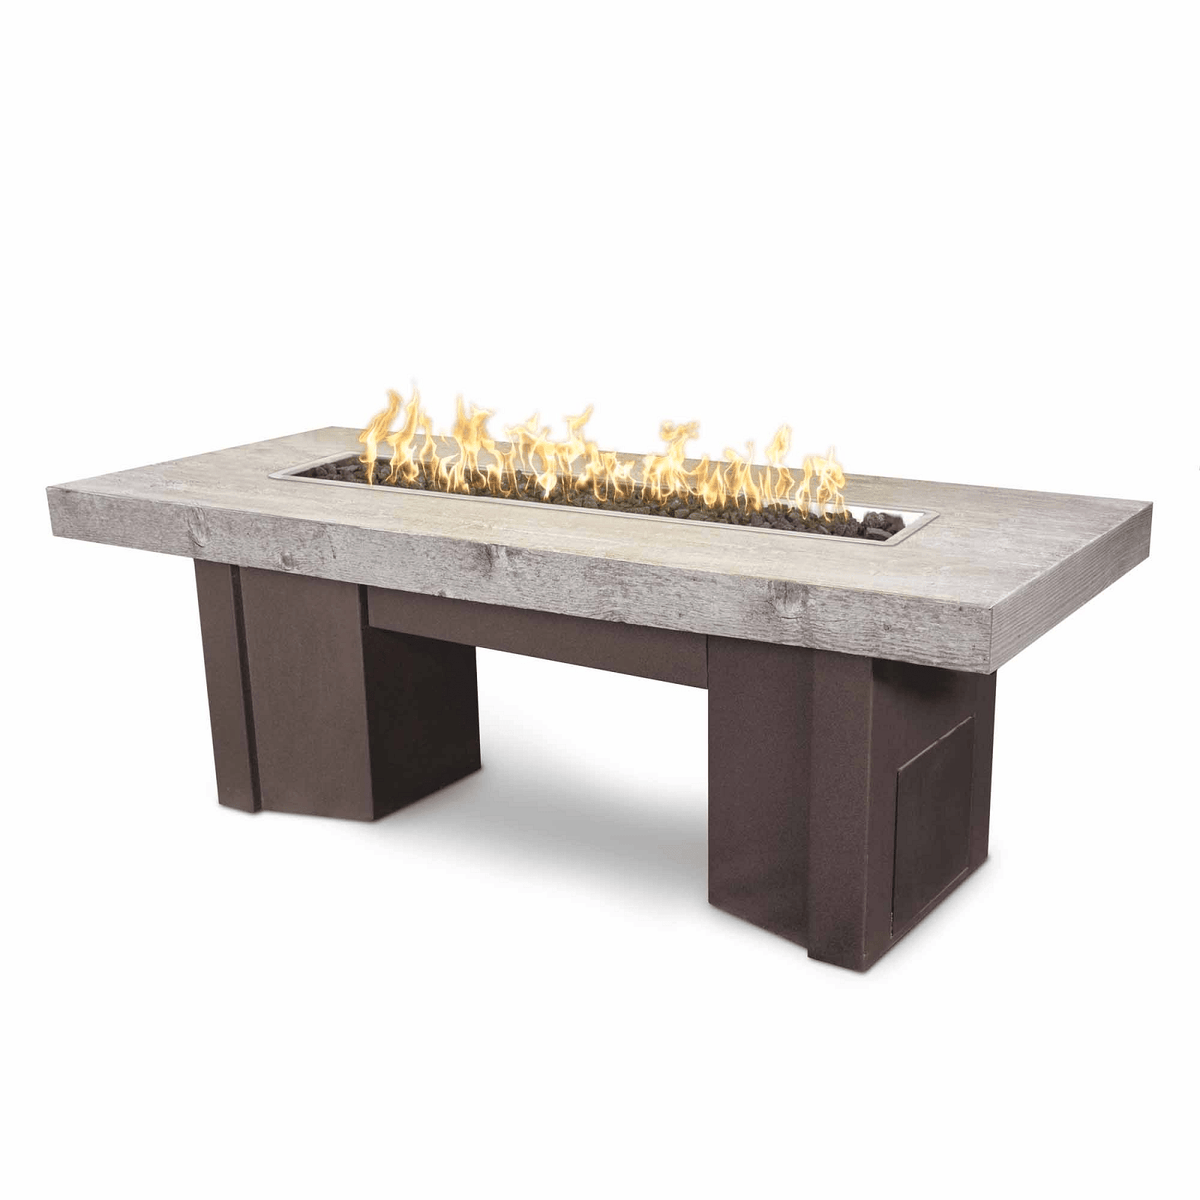 The Outdoor Plus Fire Features The Outdoor Plus 78&quot; Alameda Fire Table Wood Grain - 110V Plug &amp; Play Electronic Ignition / OPT-ALMWG78EKIT